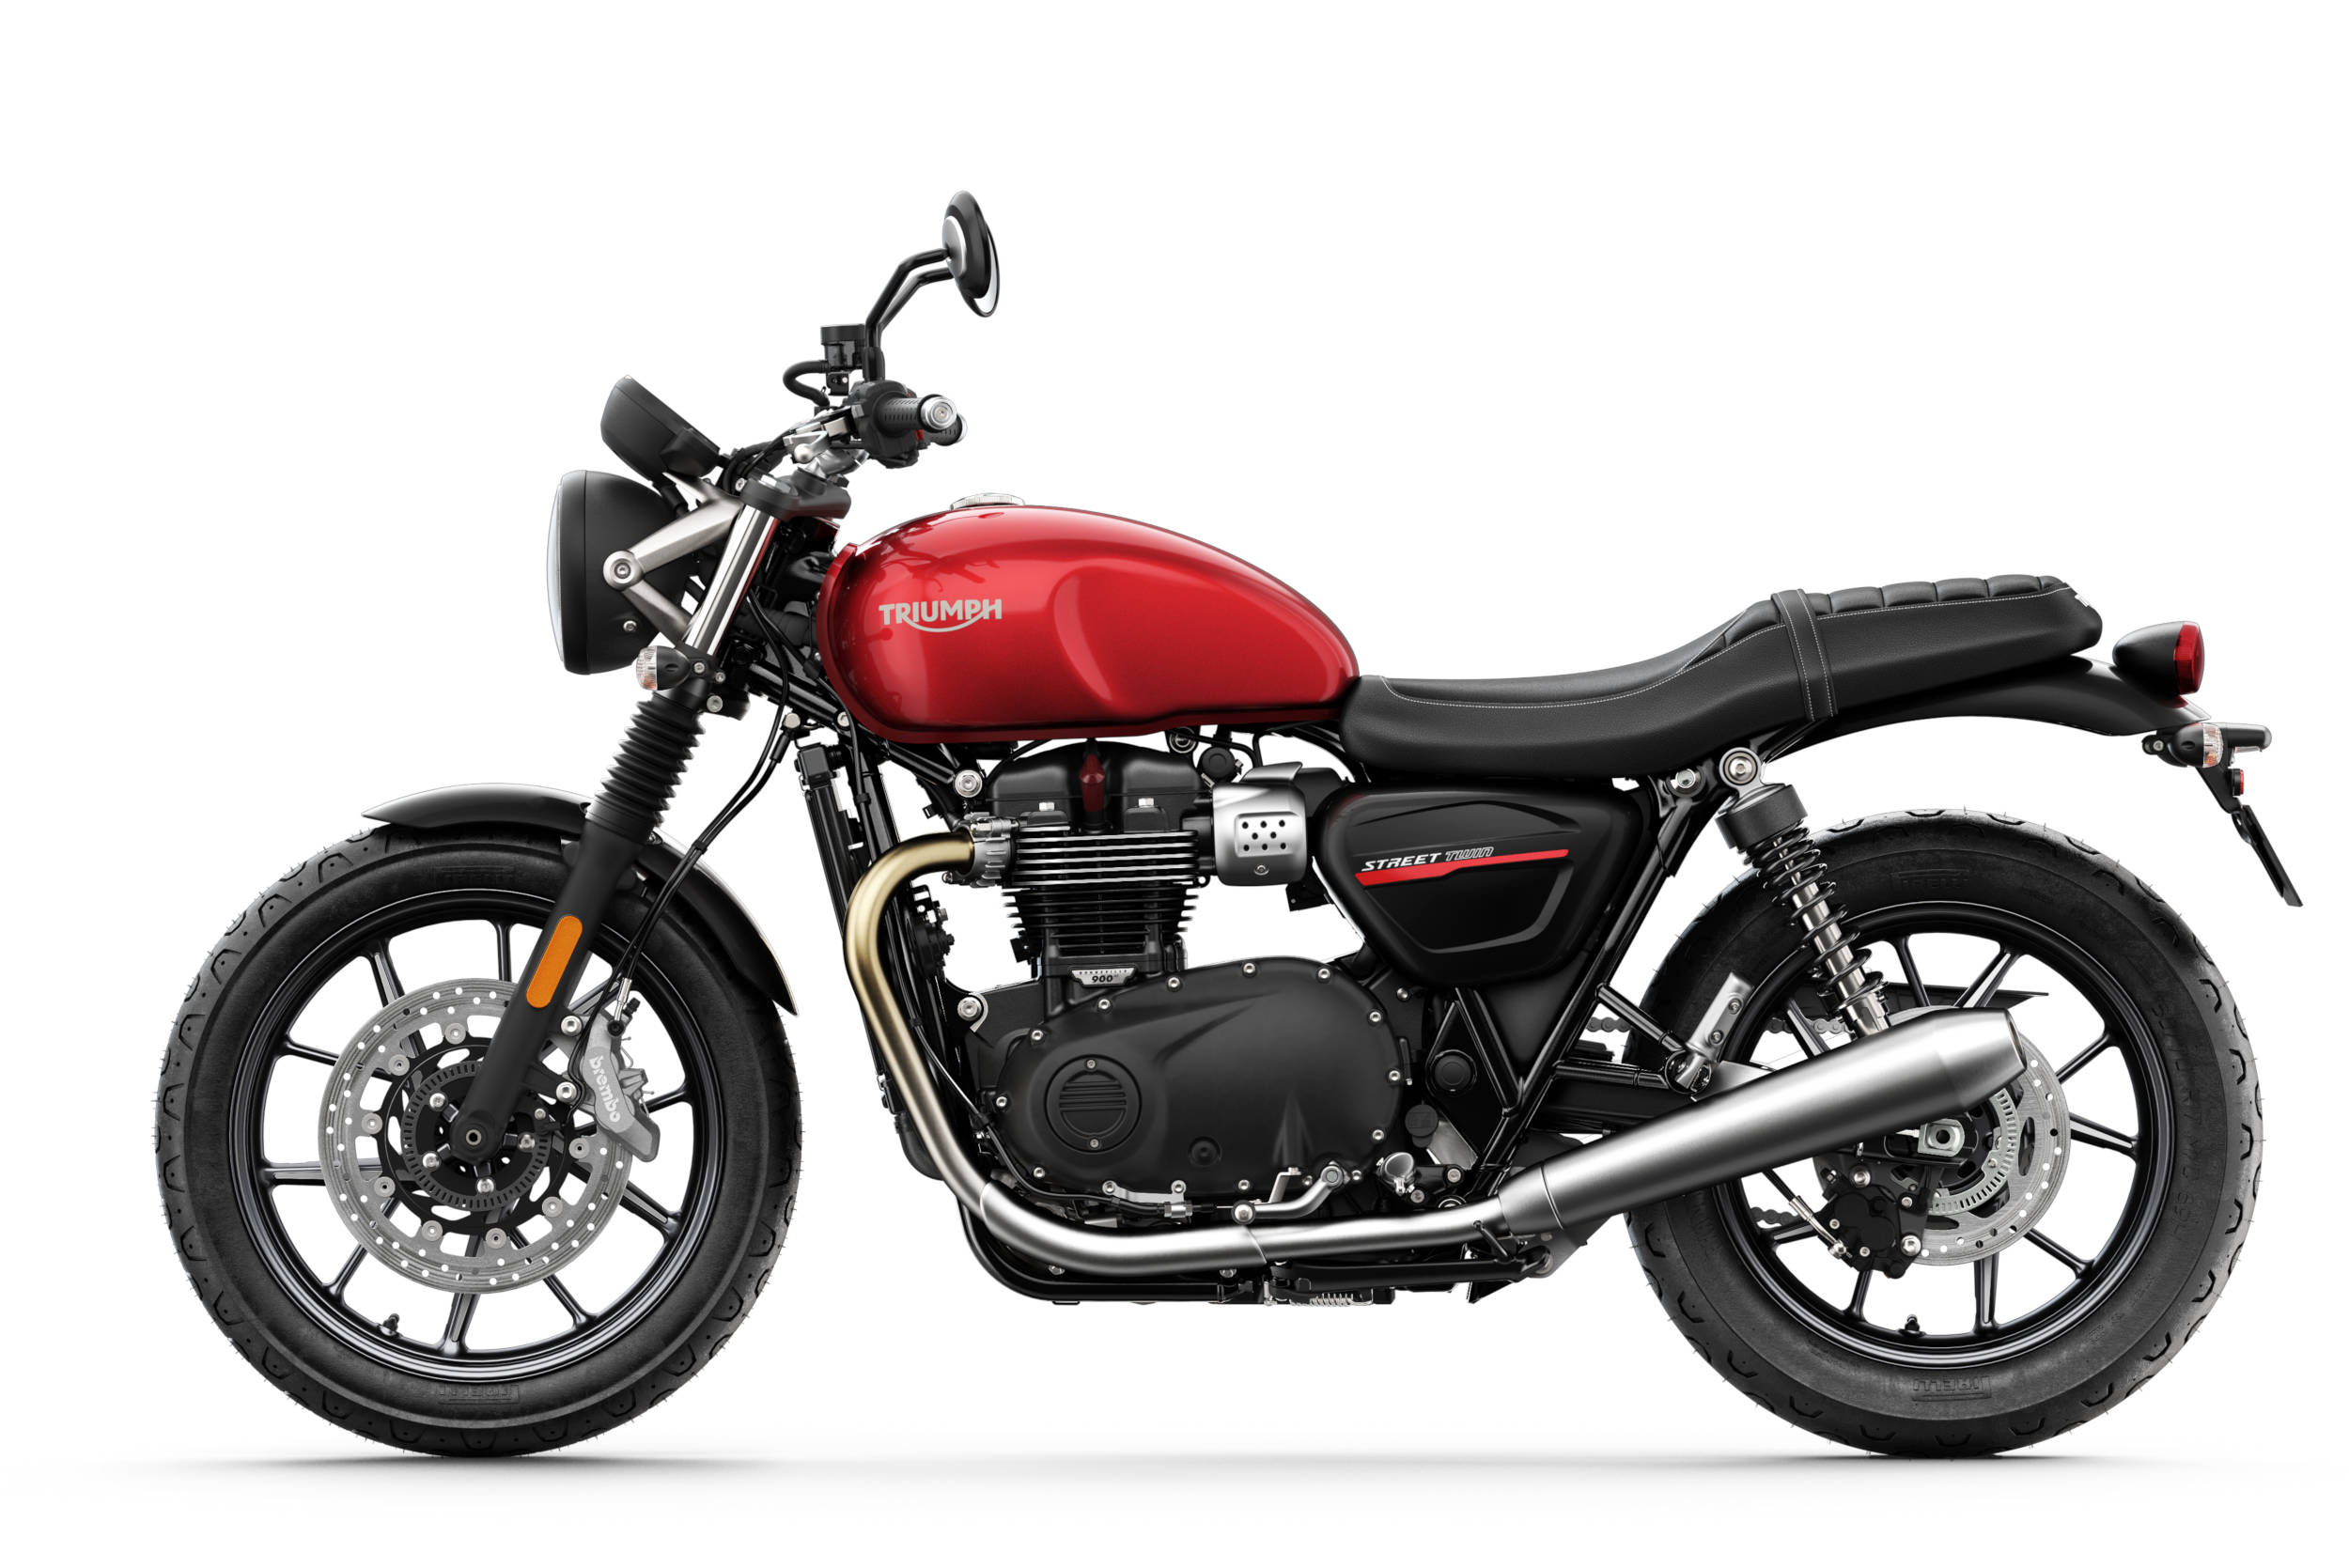 <p>The 2019 Triumph Street Twin has been priced at Rs 7.45 lakh, ex-showroom. Gets subtle cosmetic updates and a more powerful engine. <a href="http://overdrive.in/news-cars-auto/2019-triumph-street-twin-launched-in-india-at-rs-7-45-lakh/">More details here&nbsp;&nbsp;</a></p>